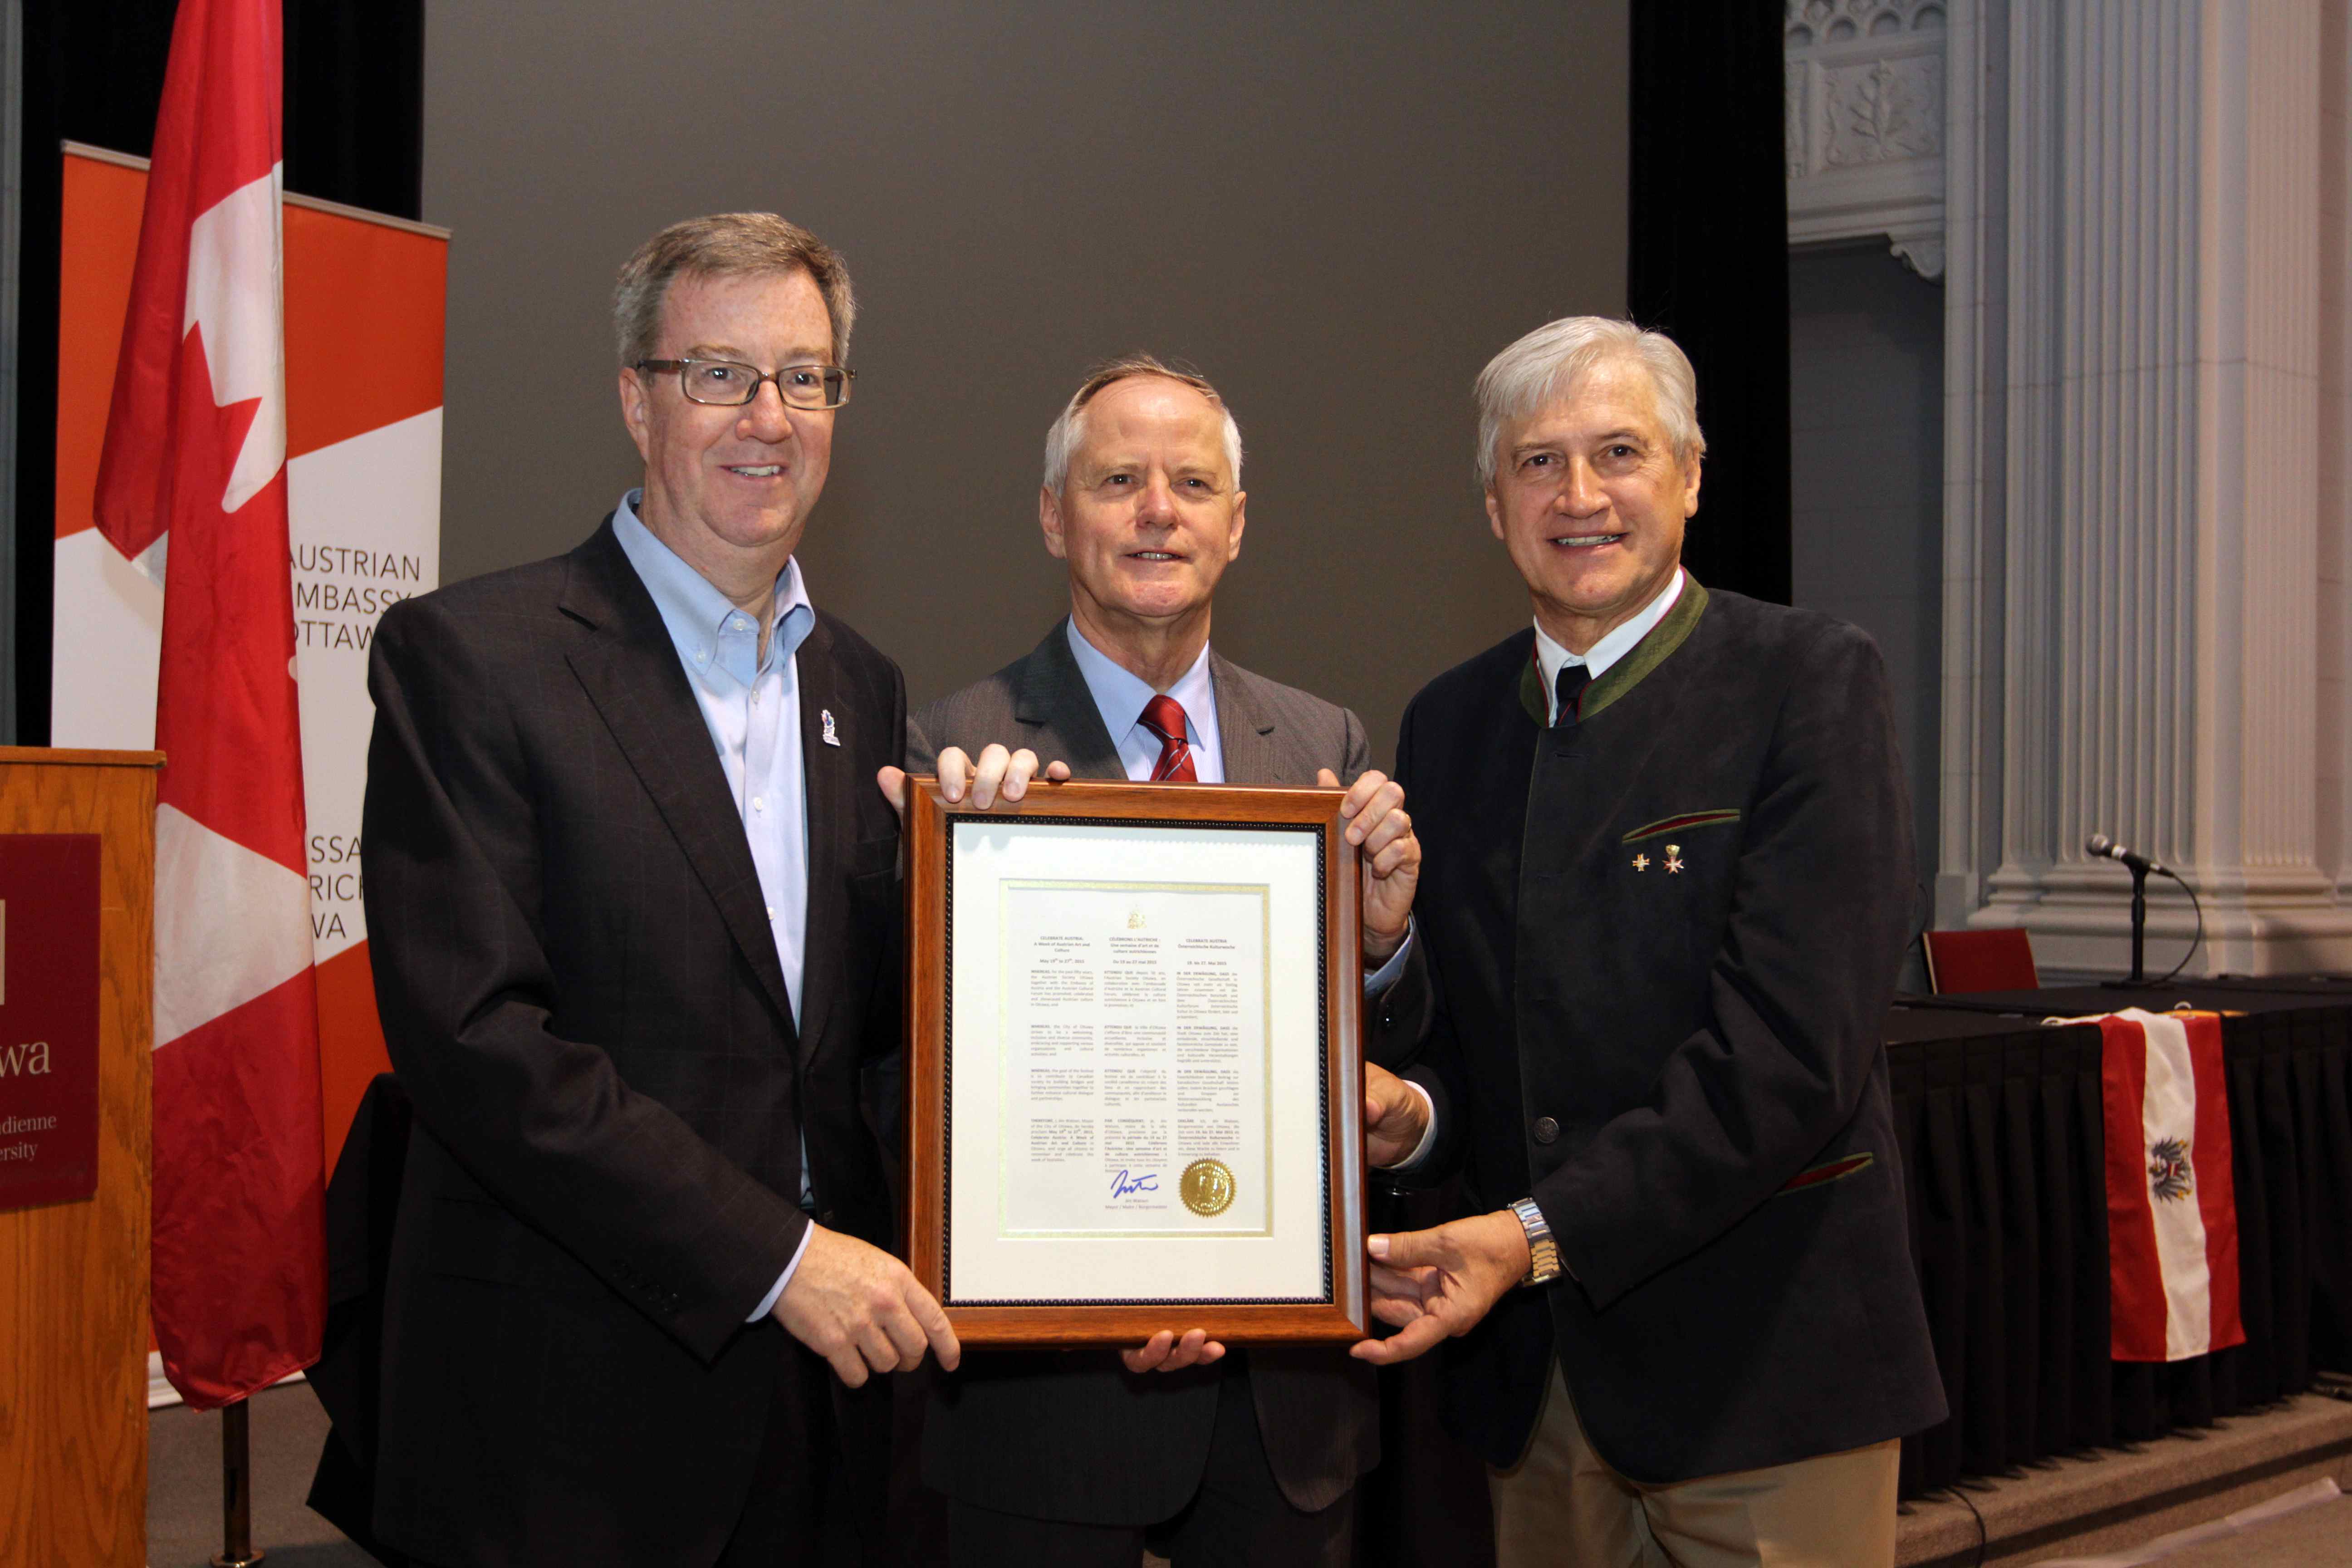 Mayor Watson, Amb. Riedel and ACC Pres. Pirker hold the proclamation